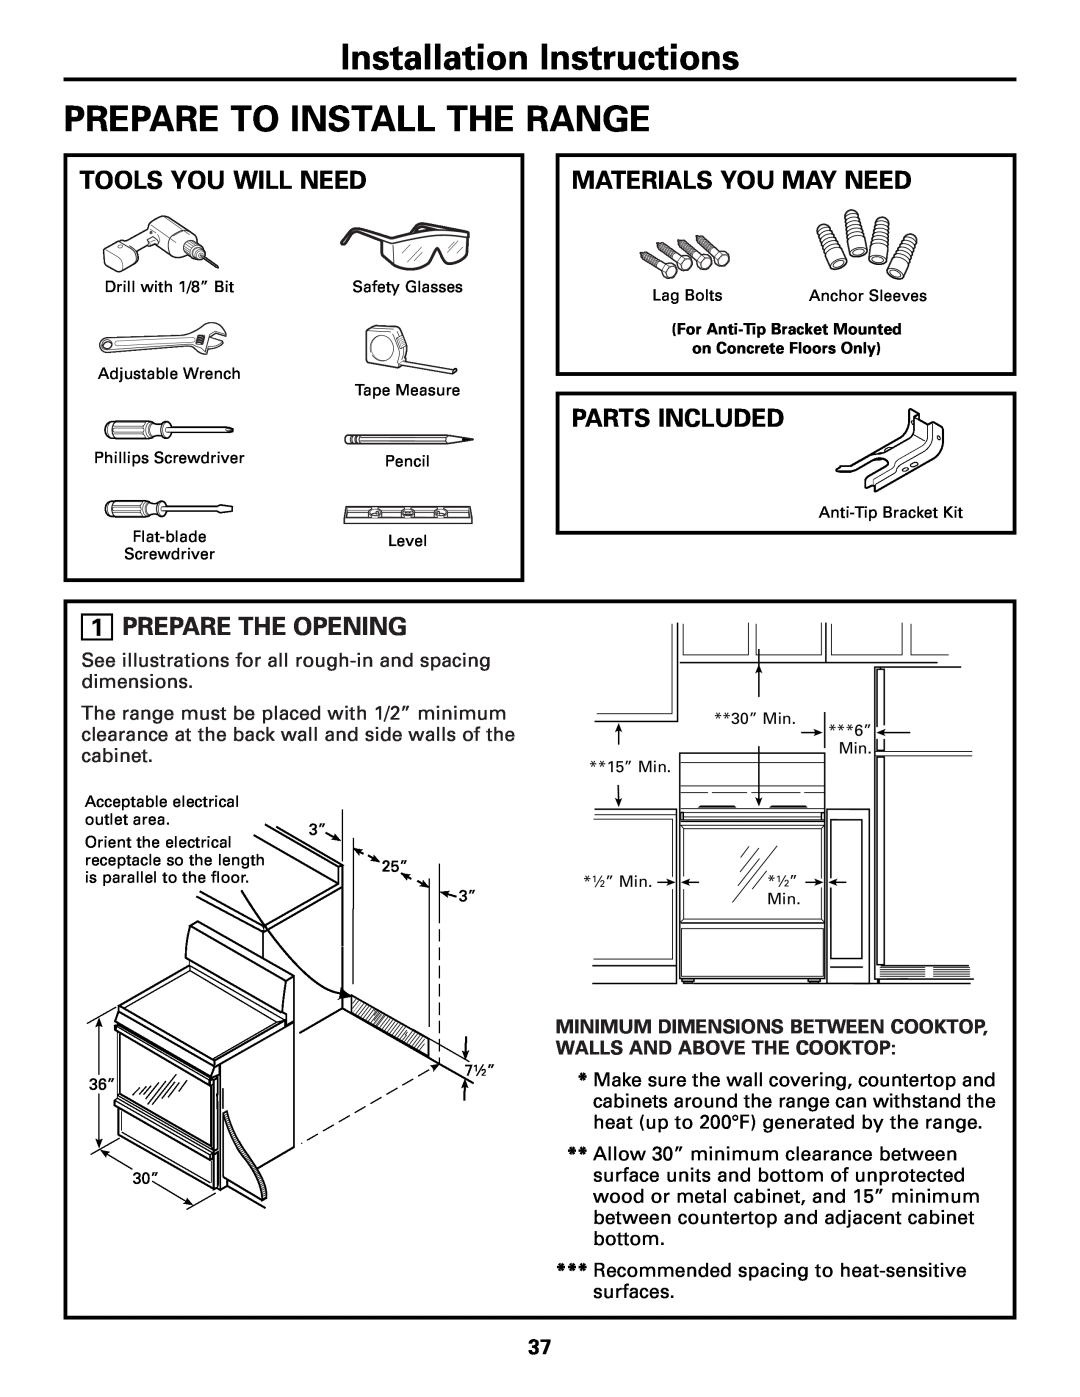 GE JCB905, JCB968 Installation Instructions, Prepare To Install The Range, Tools You Will Need, Materials You May Need 